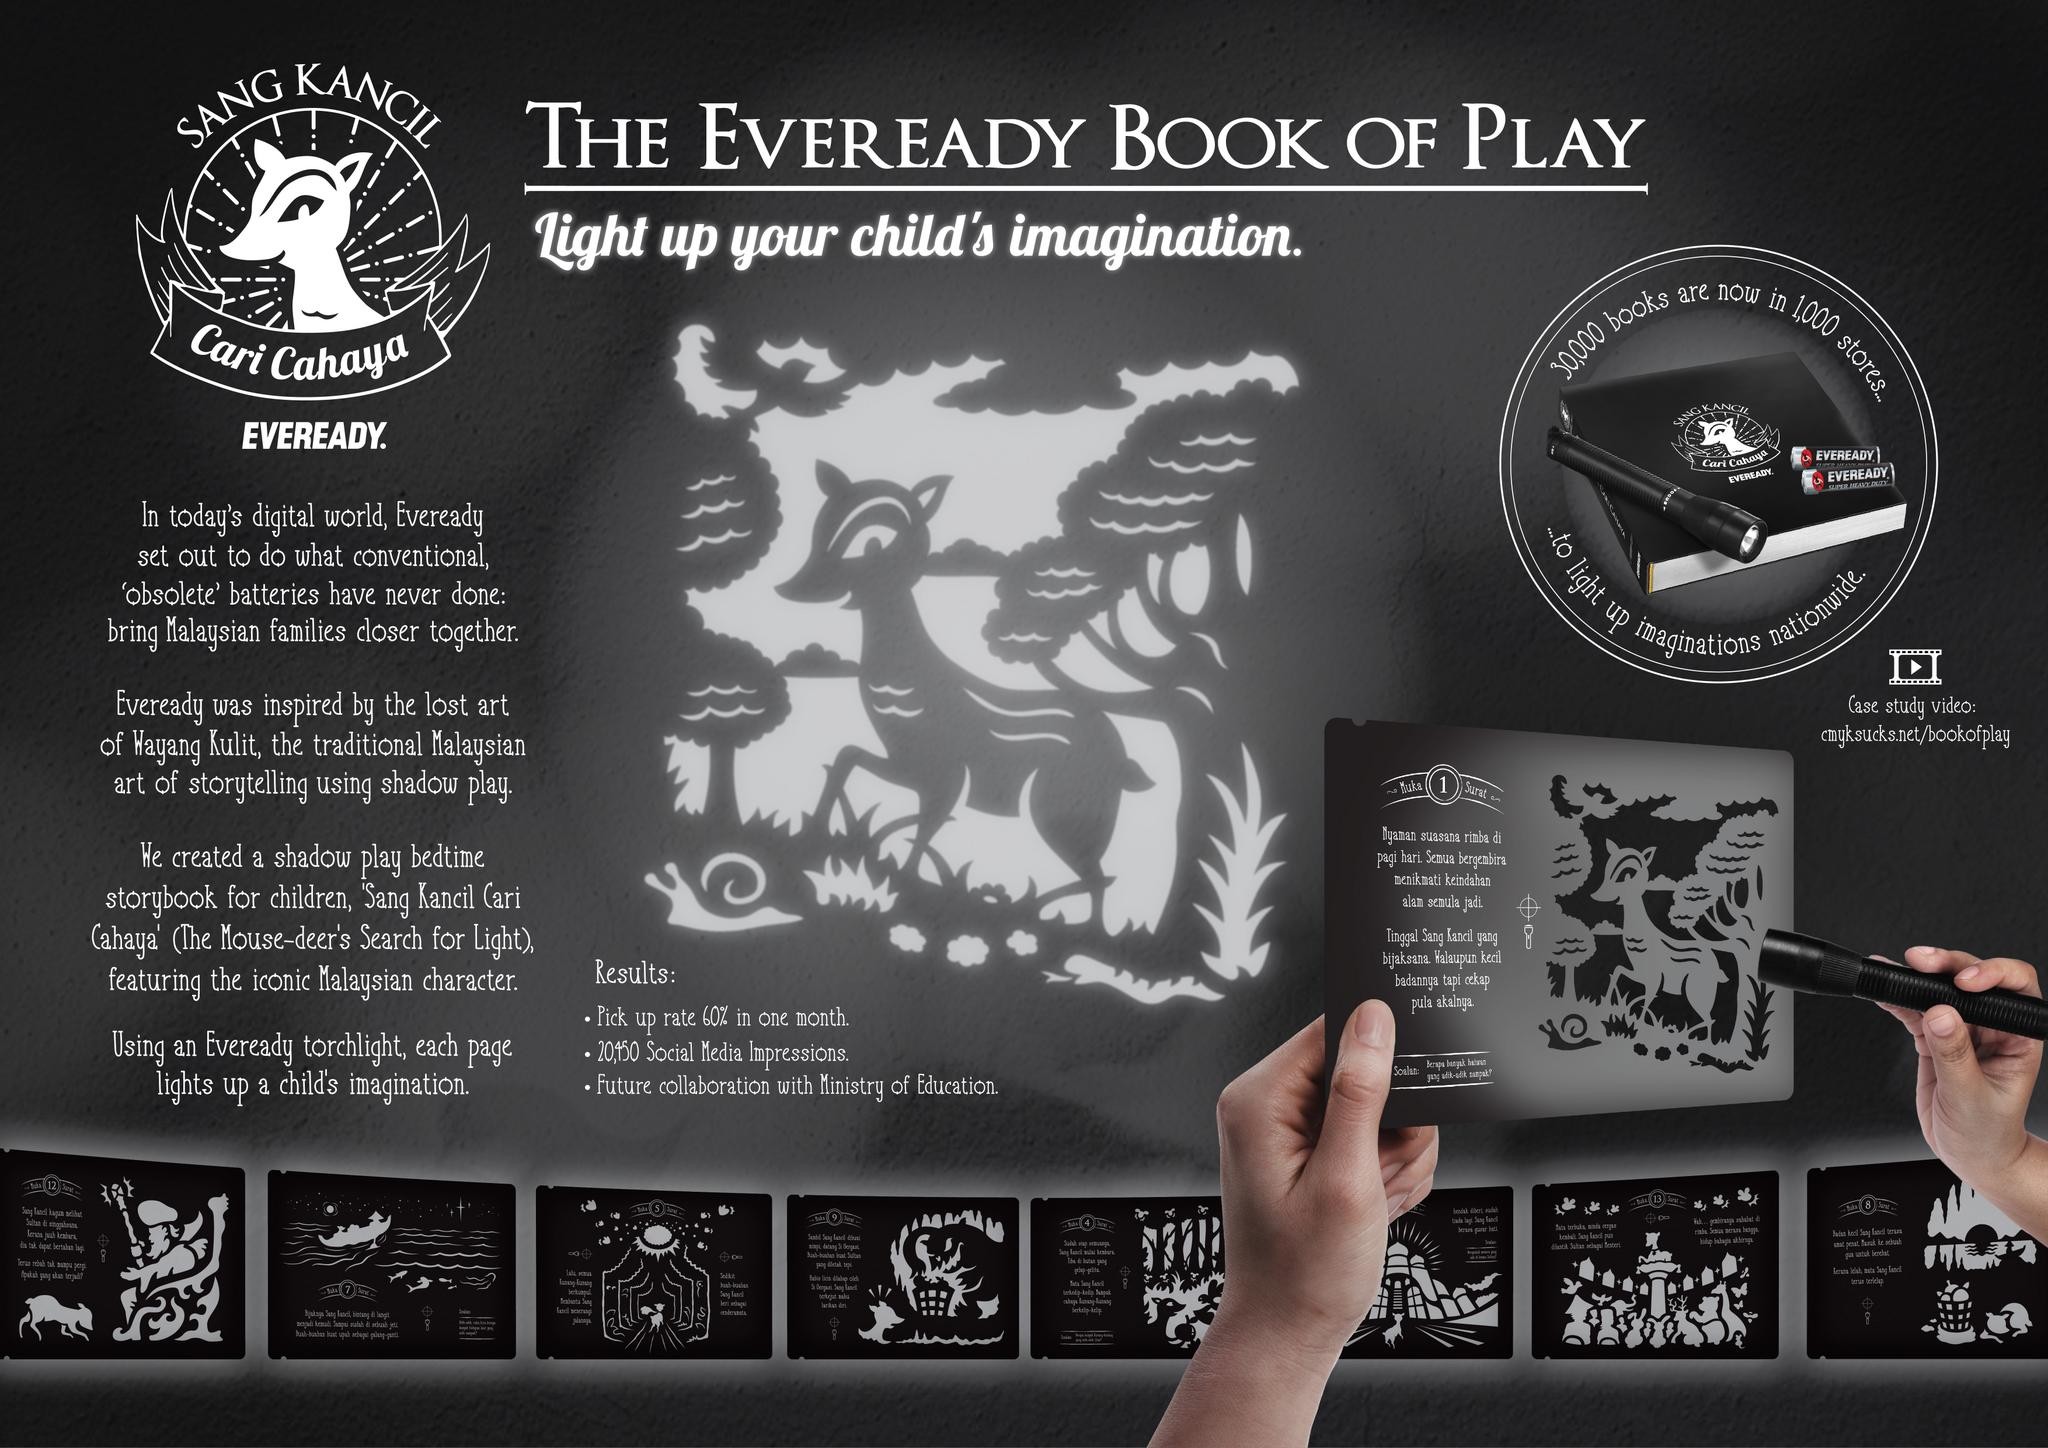 THE EVEREADY BOOK OF PLAY